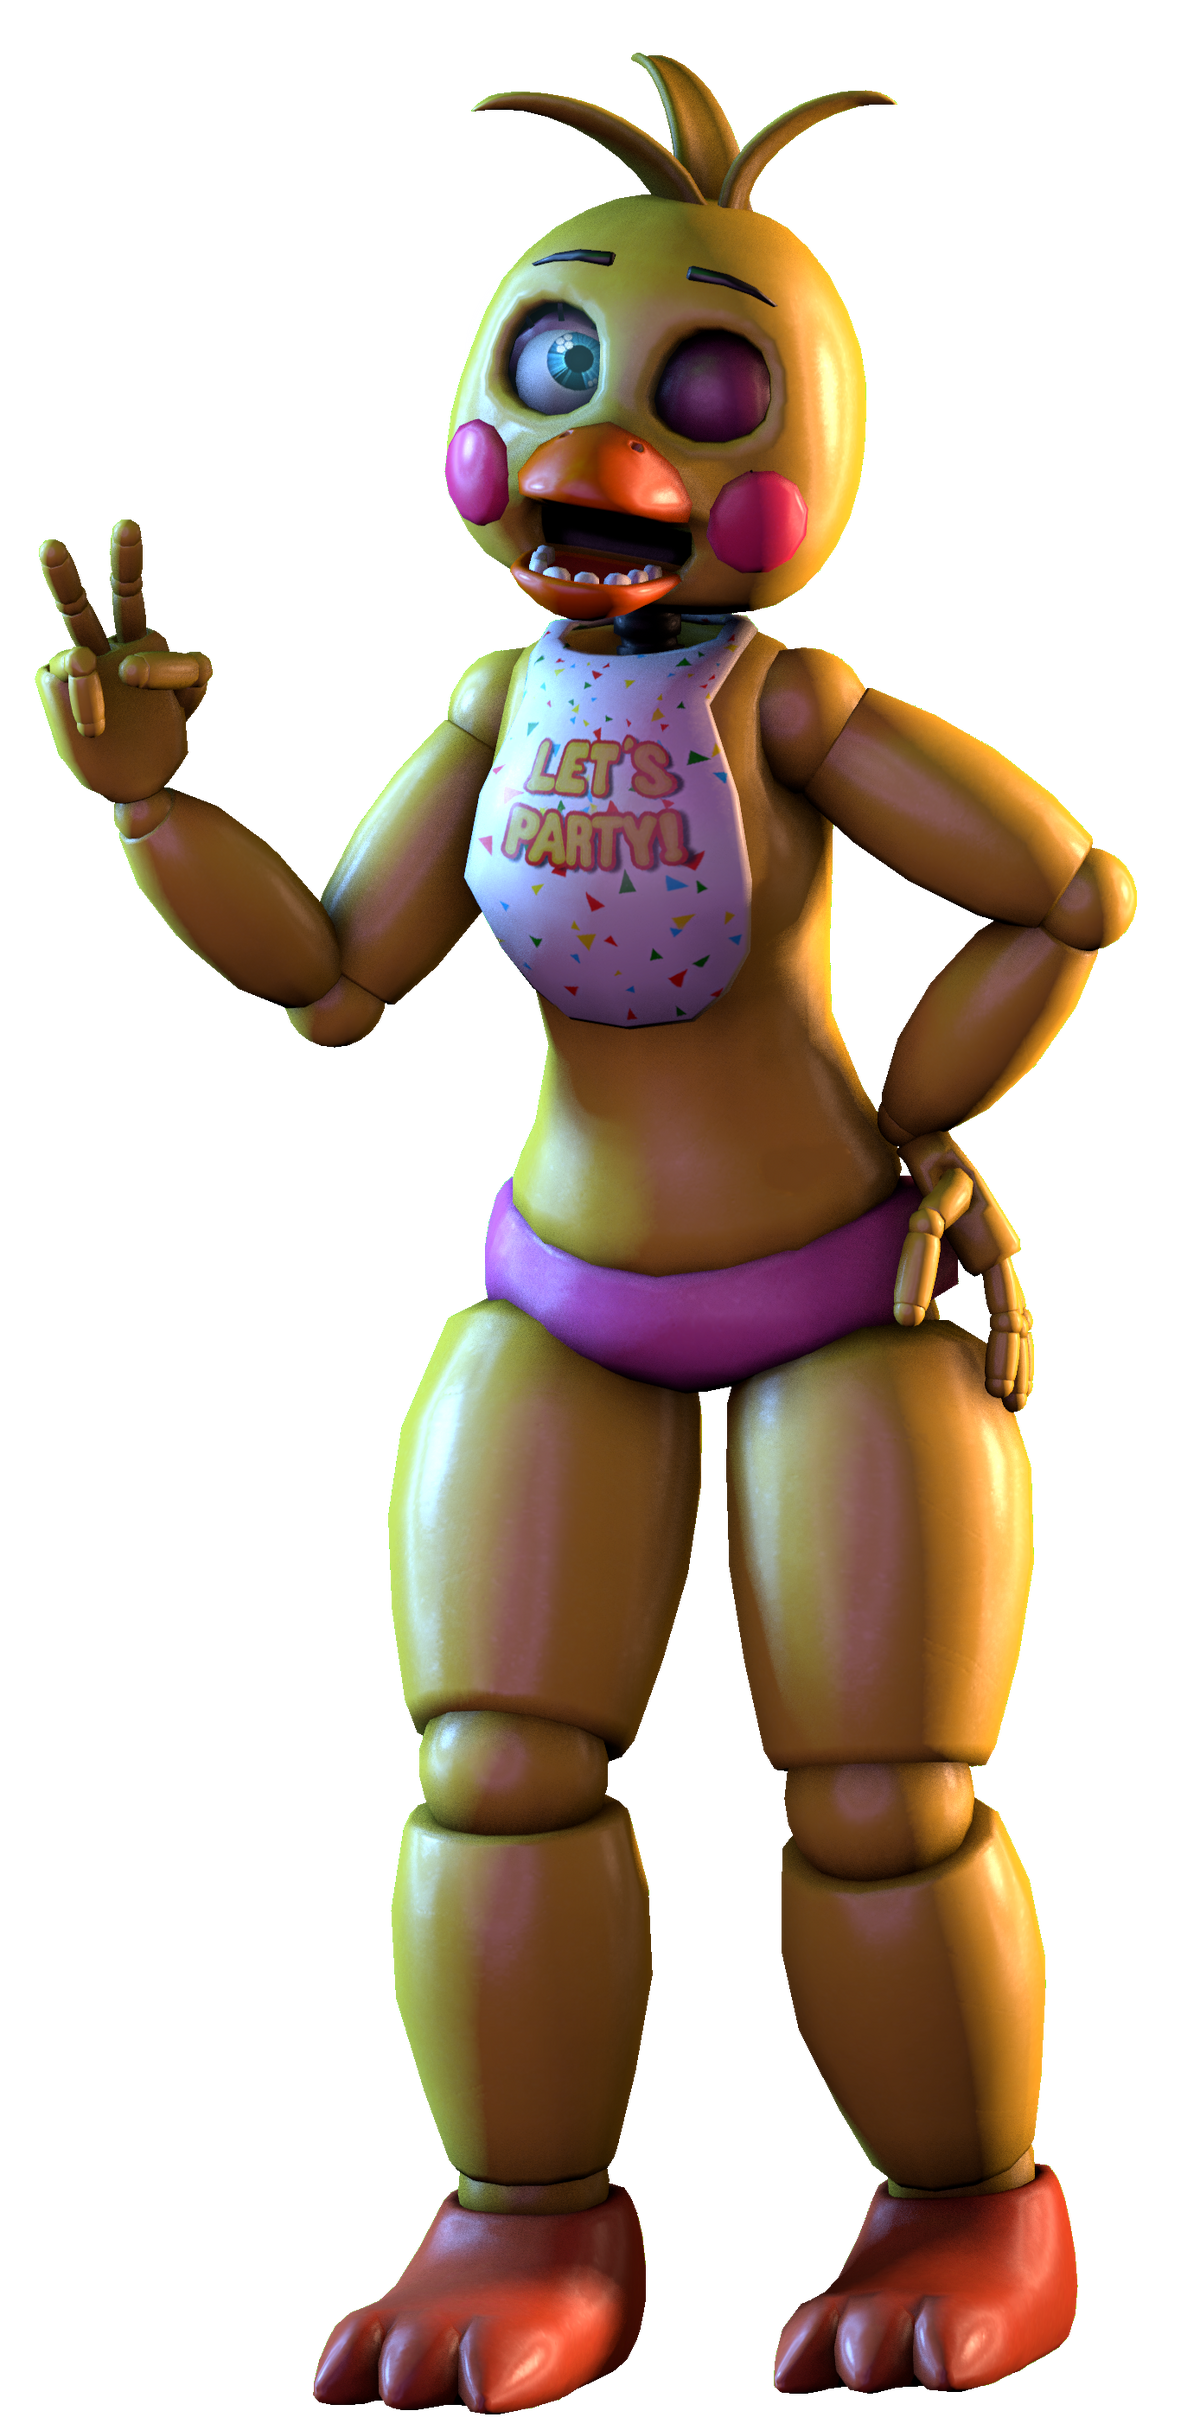 Toy Chica, Five Nights at Freddys 2 Wiki